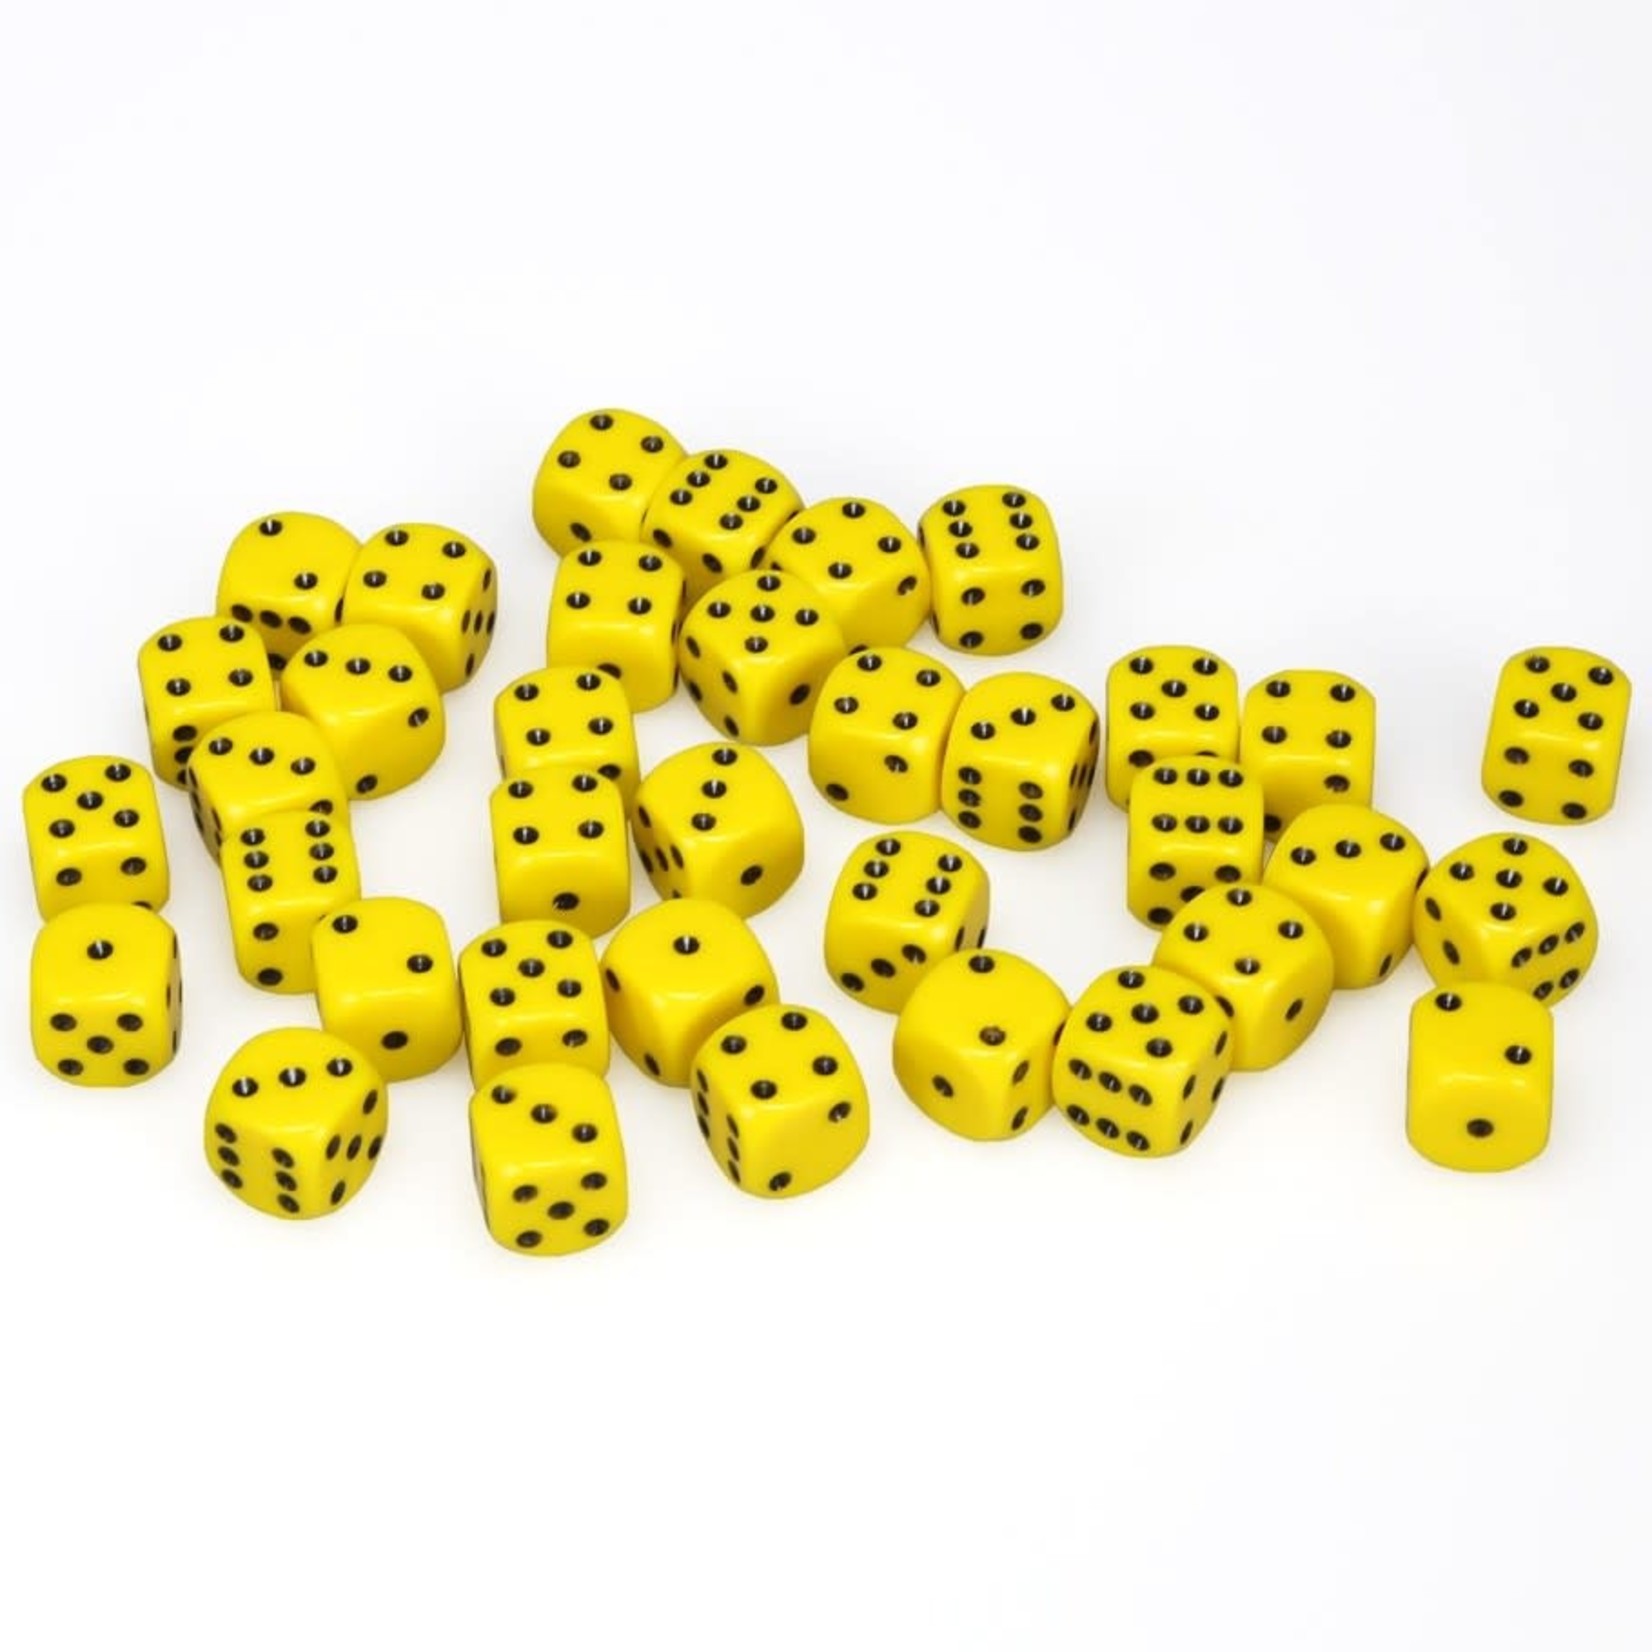 Chessex Chessex Opaque Yellow with Black 12 mm d6 36 die set